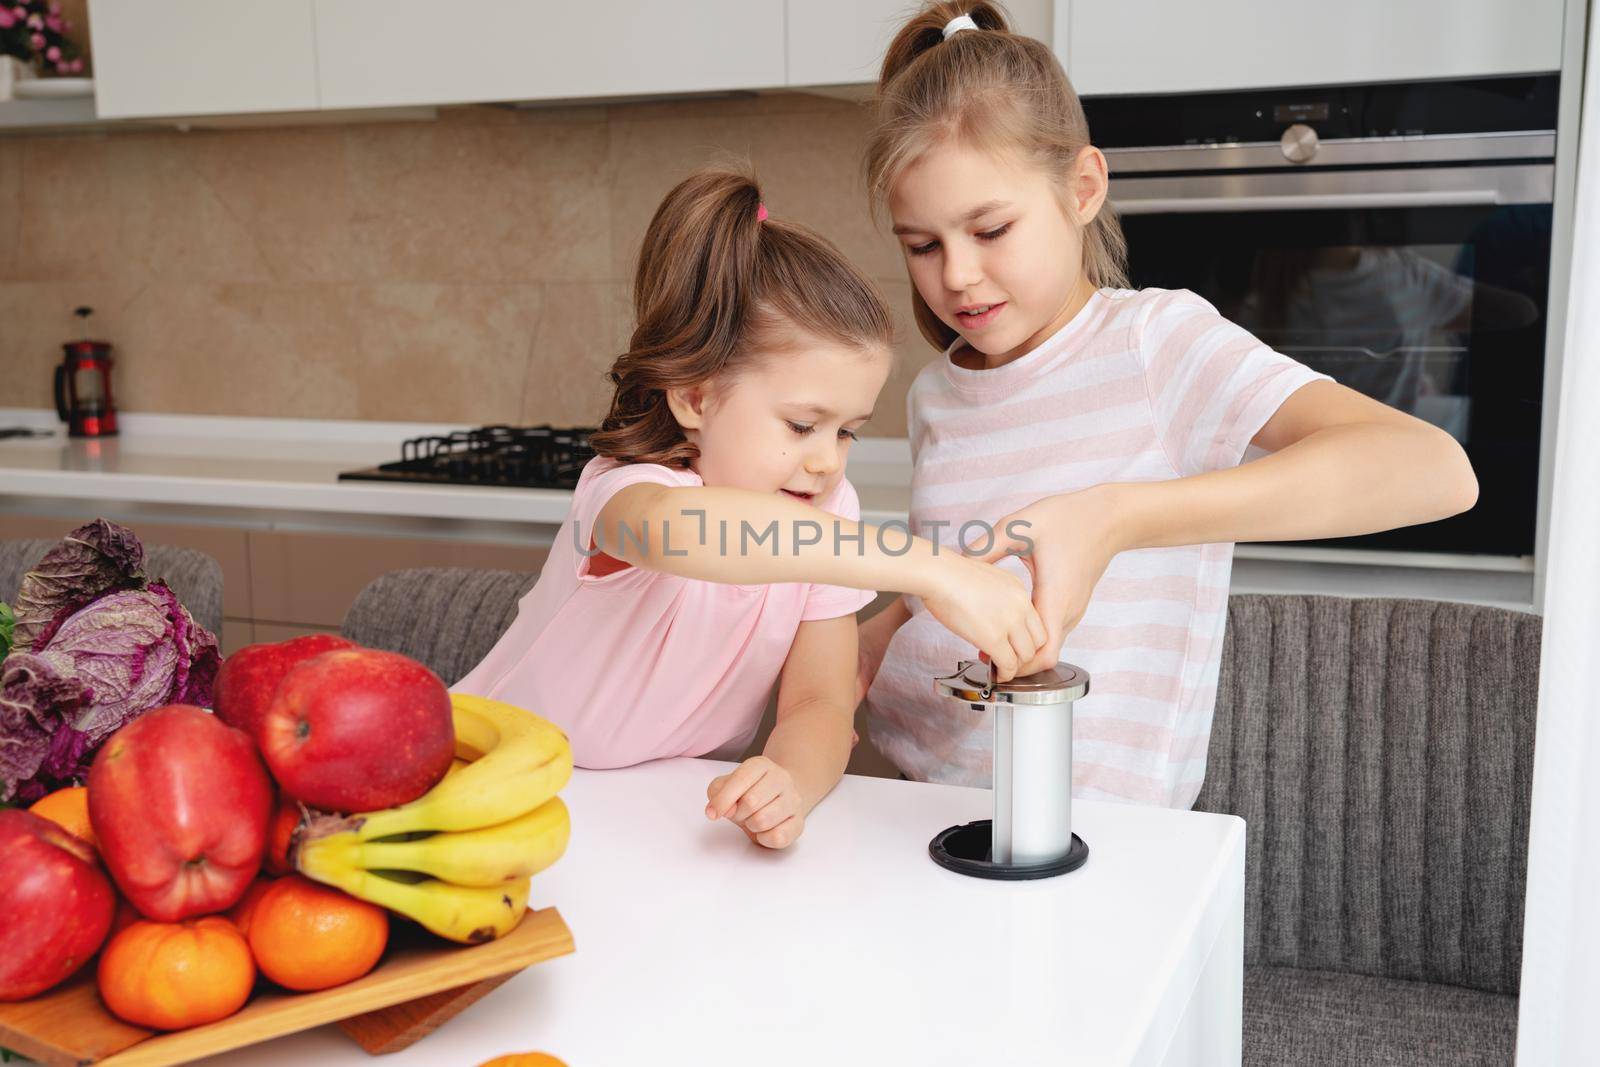 Girls looking with interest at socket on the modern kitchen table